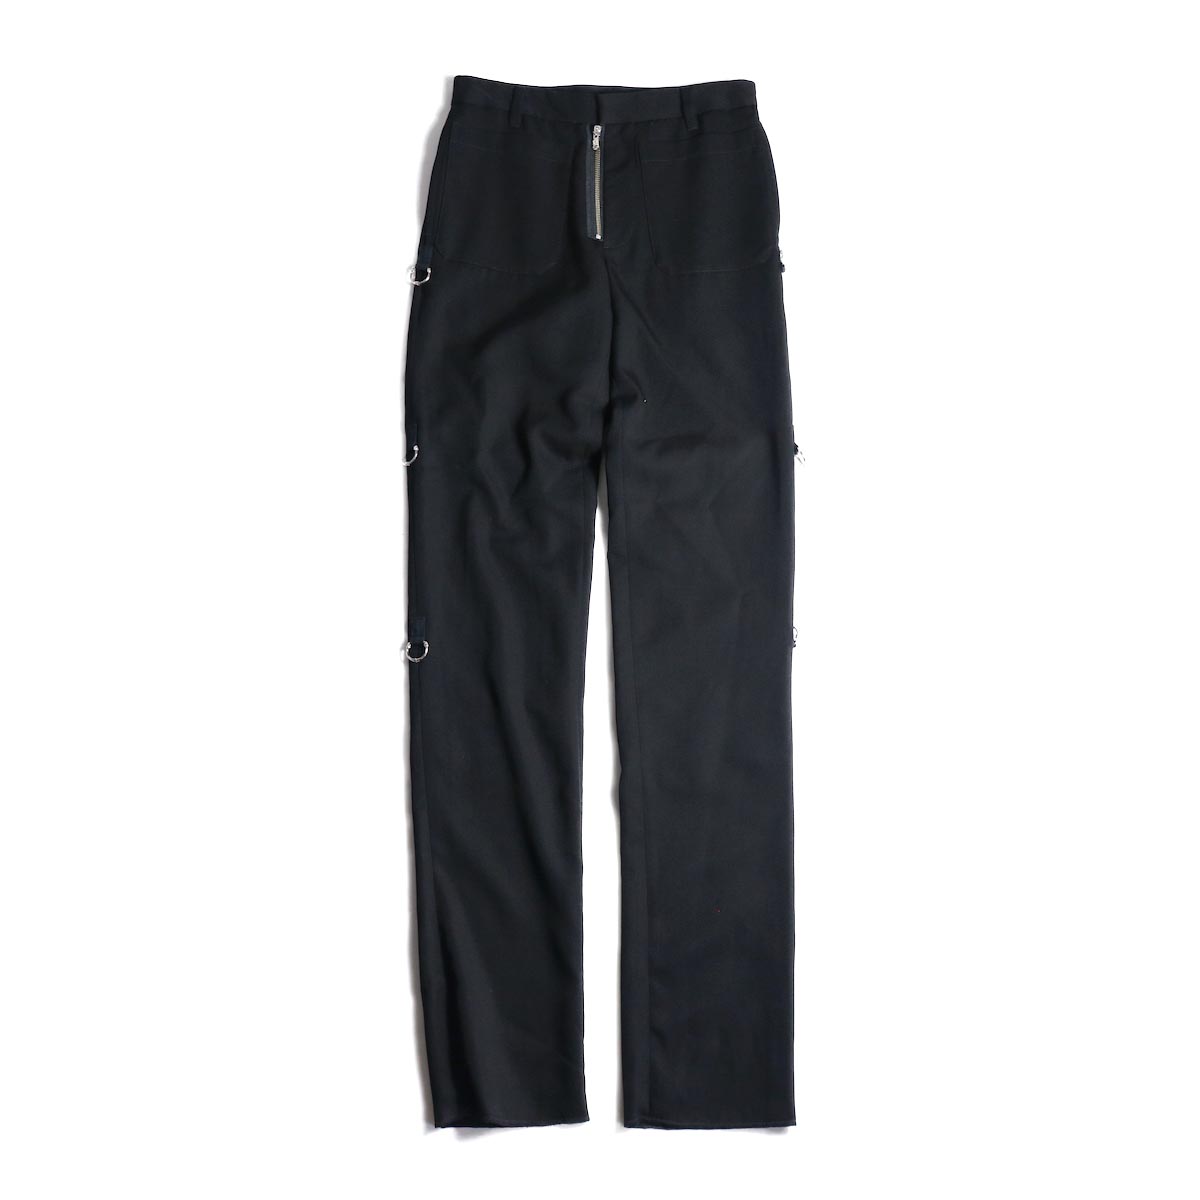 The Soloist / sp.0007bAW20 patch pocket pant.